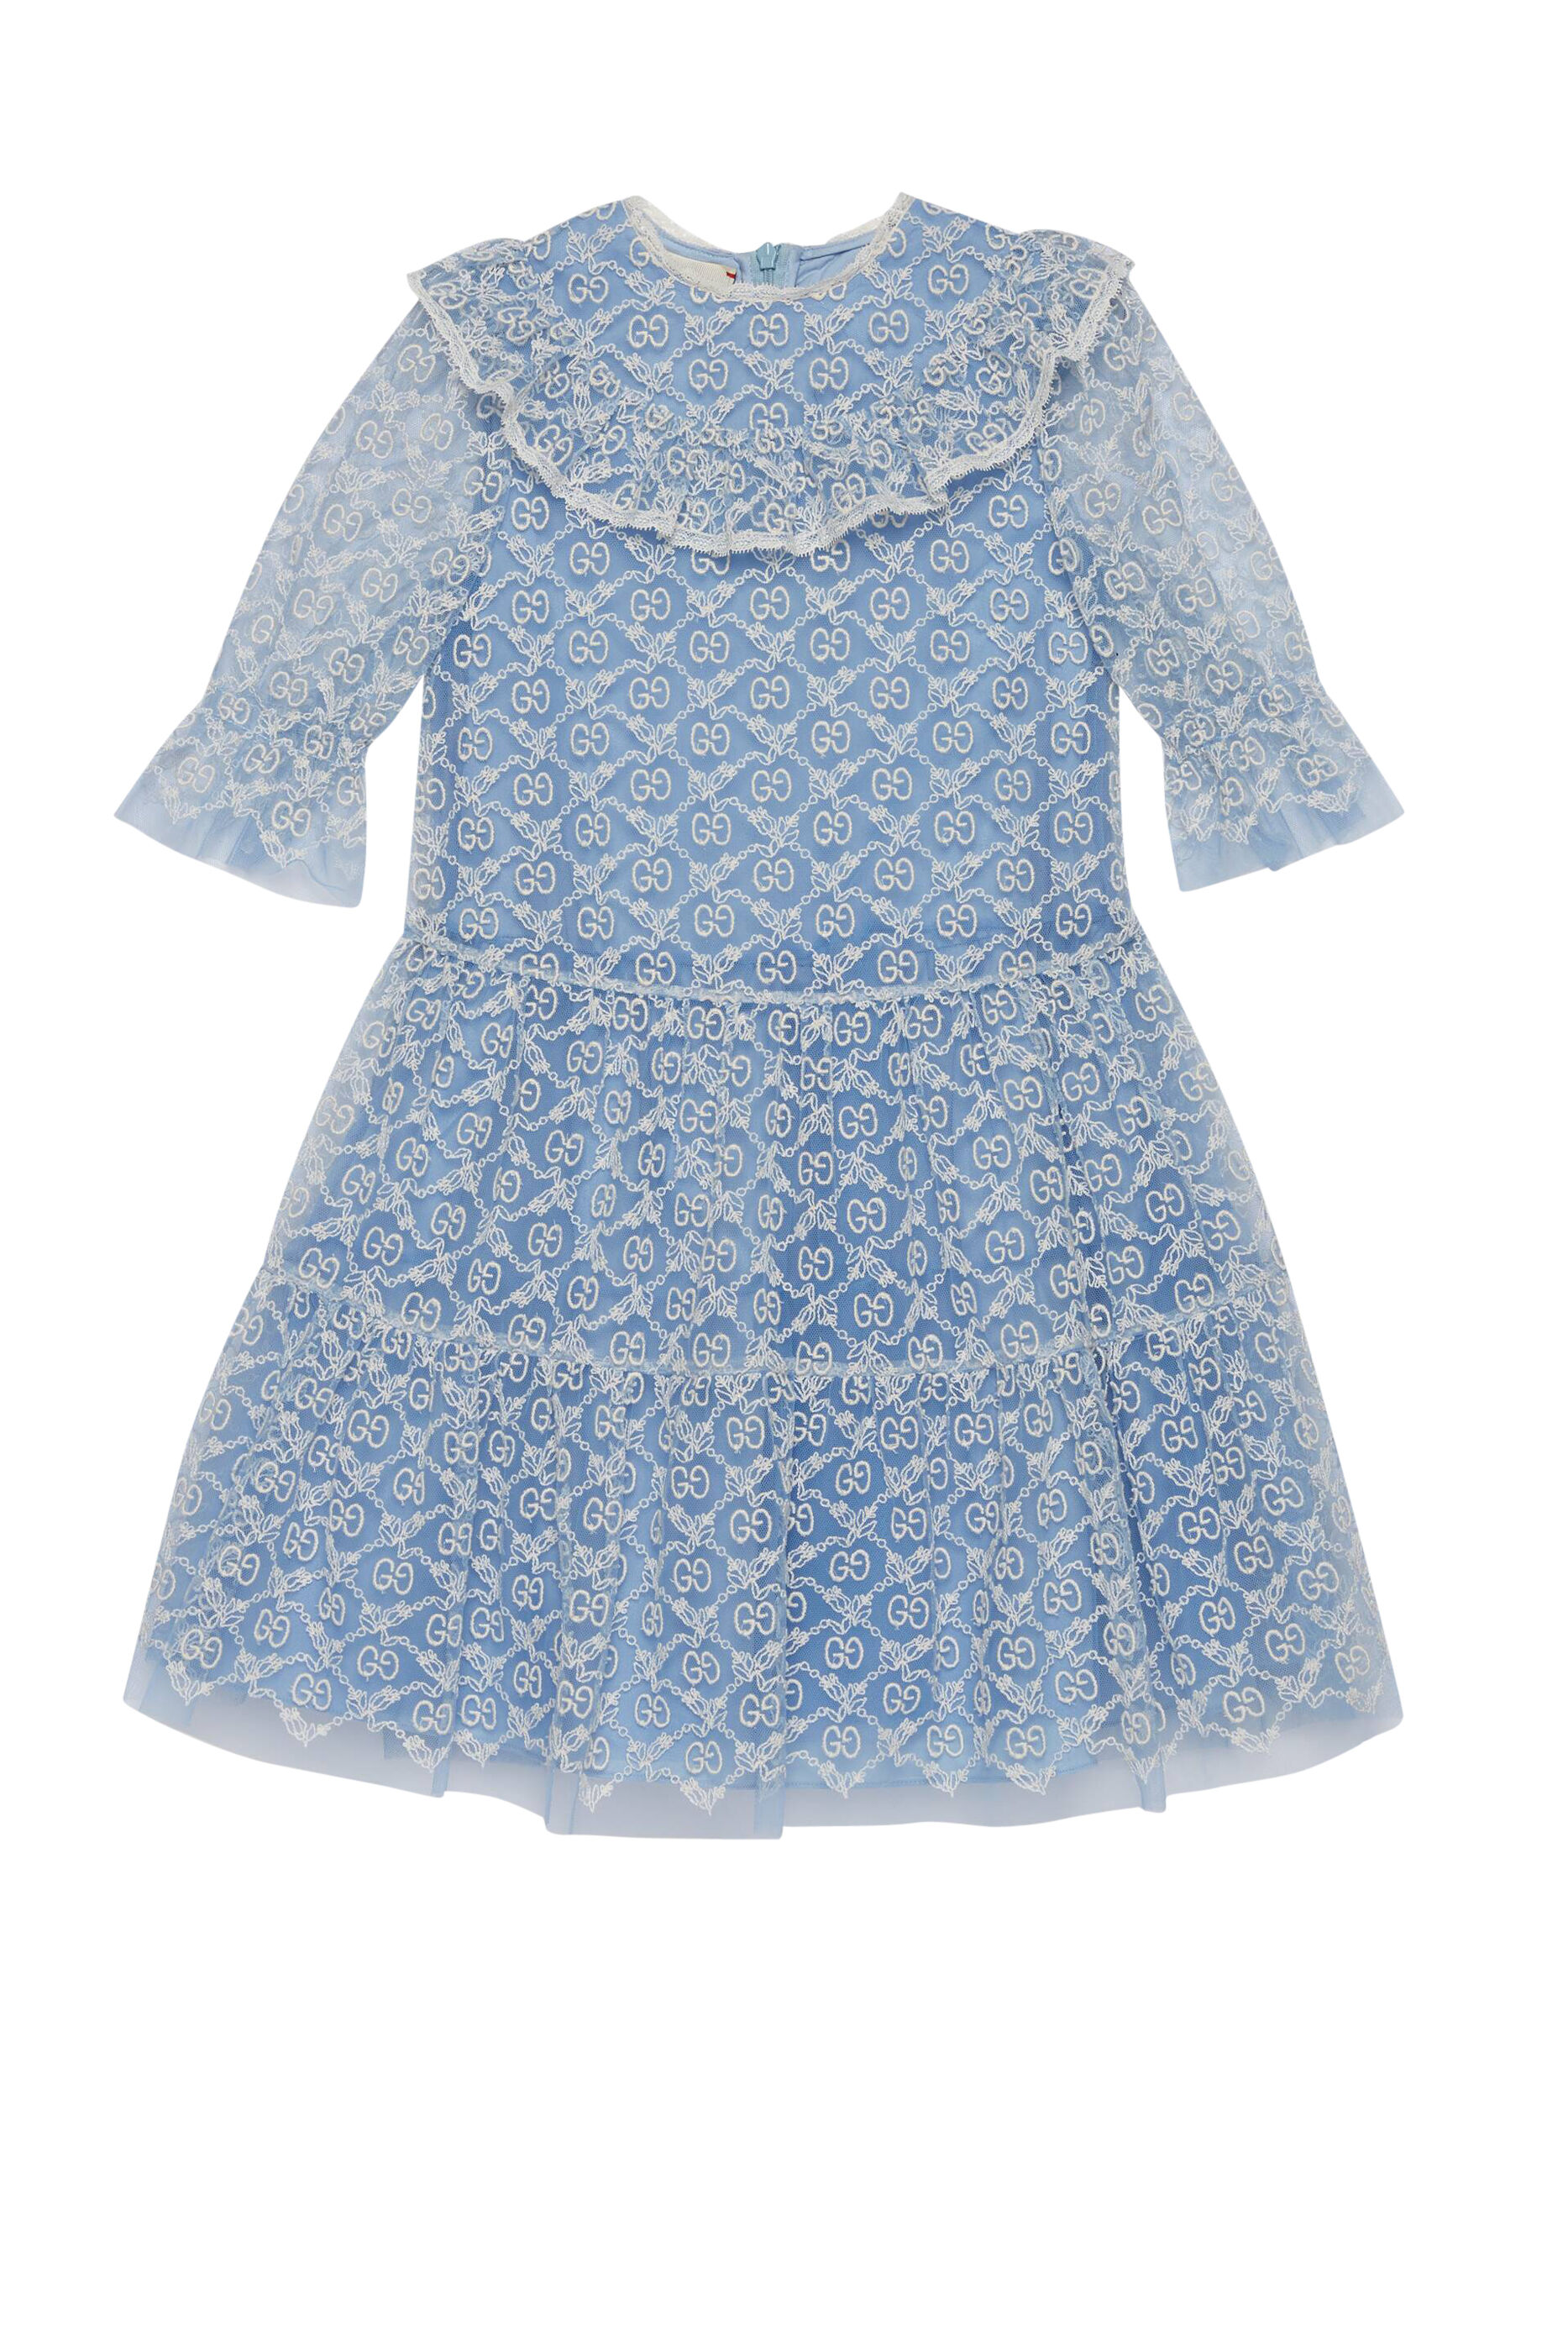 Gucci Embroidered Tulle Dress for Kids 